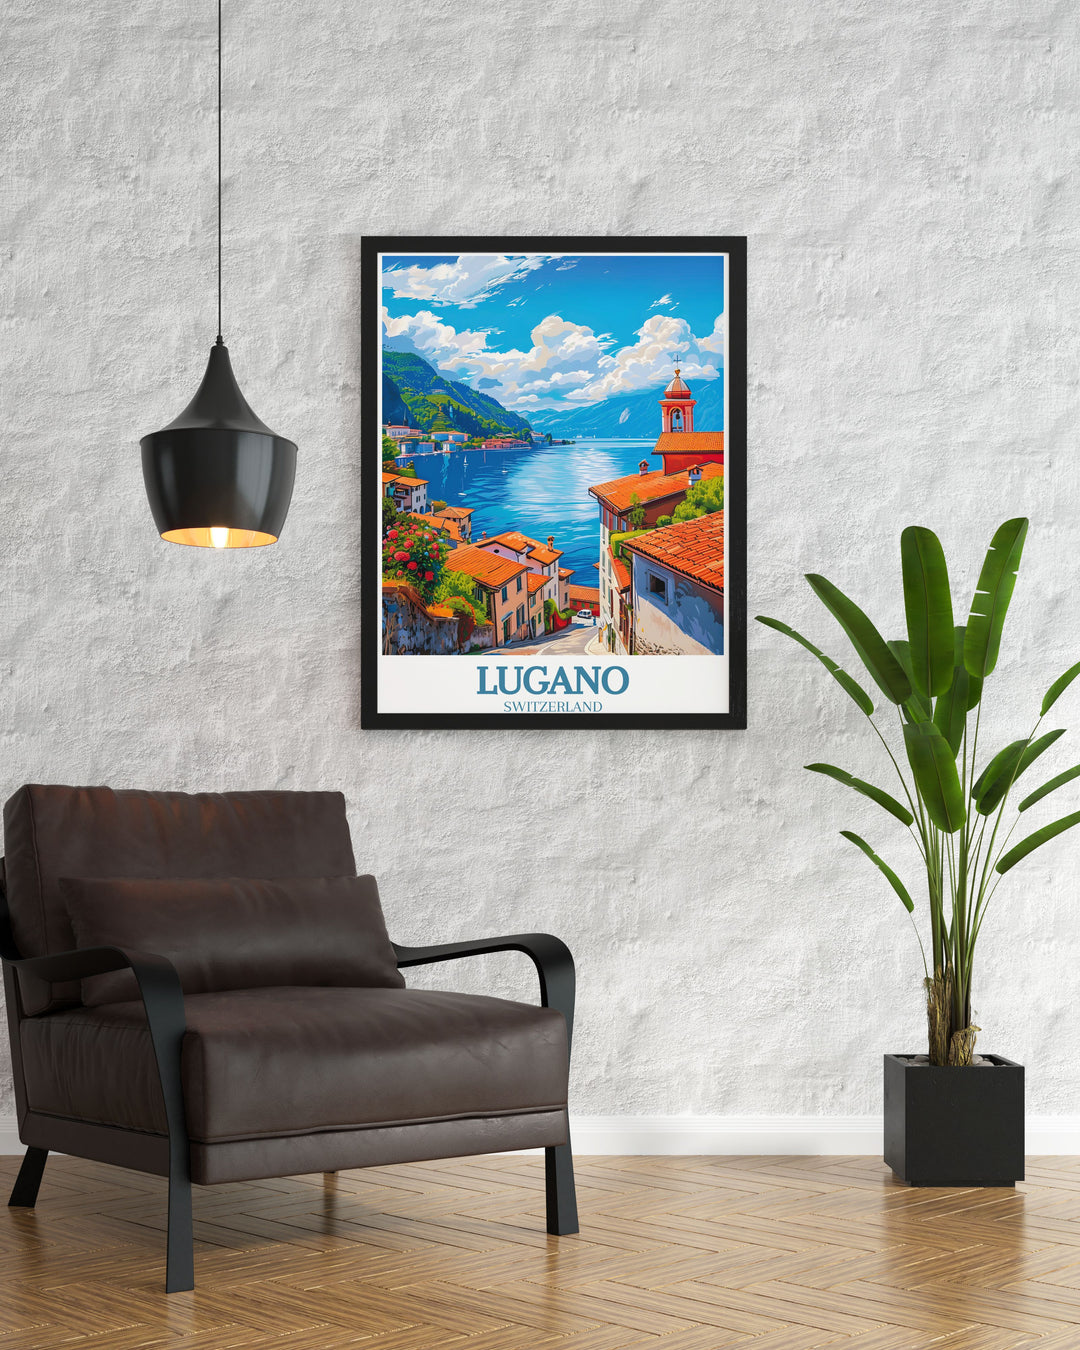 Capturing the tranquil beauty of Lake Lugano, this travel poster brings the serene ambiance of the Swiss Alps into your living space. Ideal for those who appreciate peaceful settings.